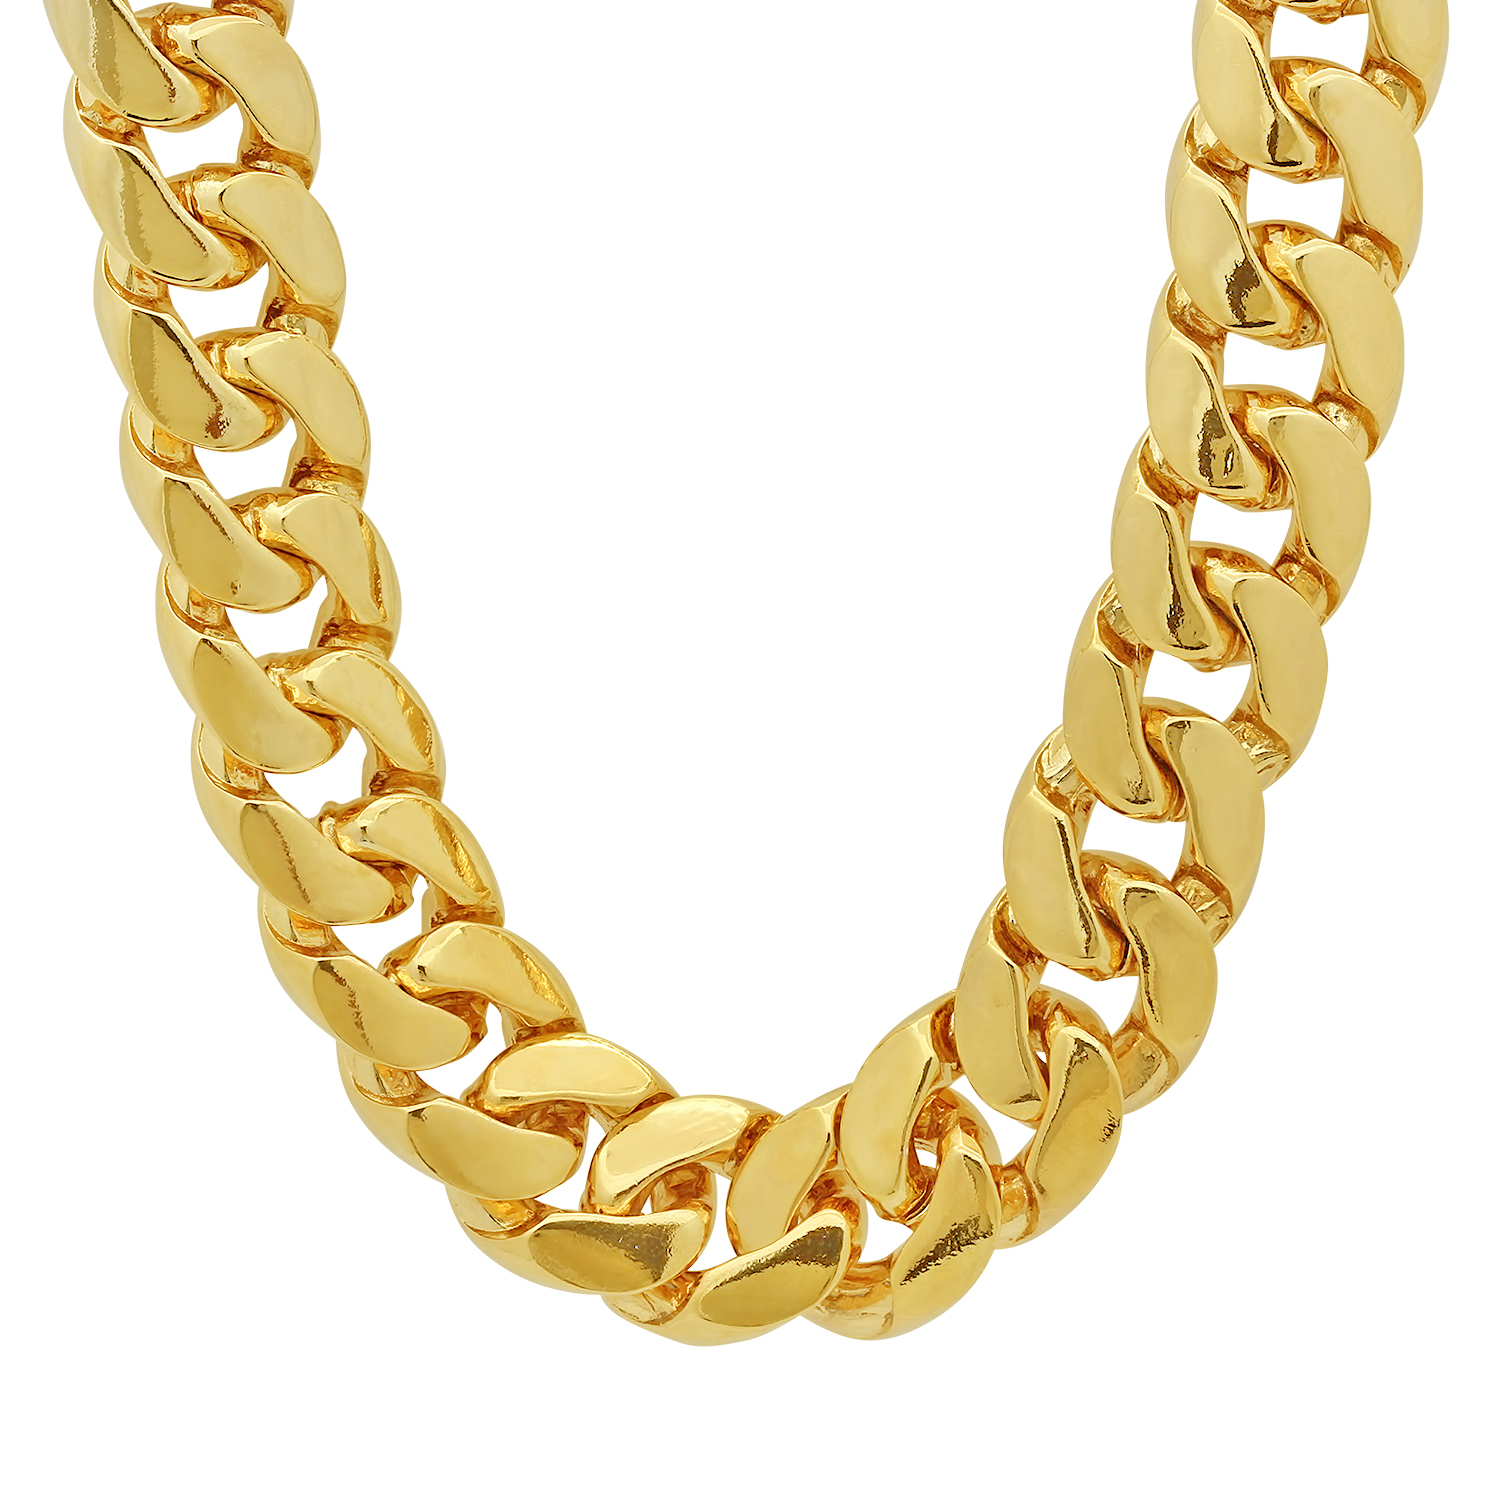 Golden Chain Png 